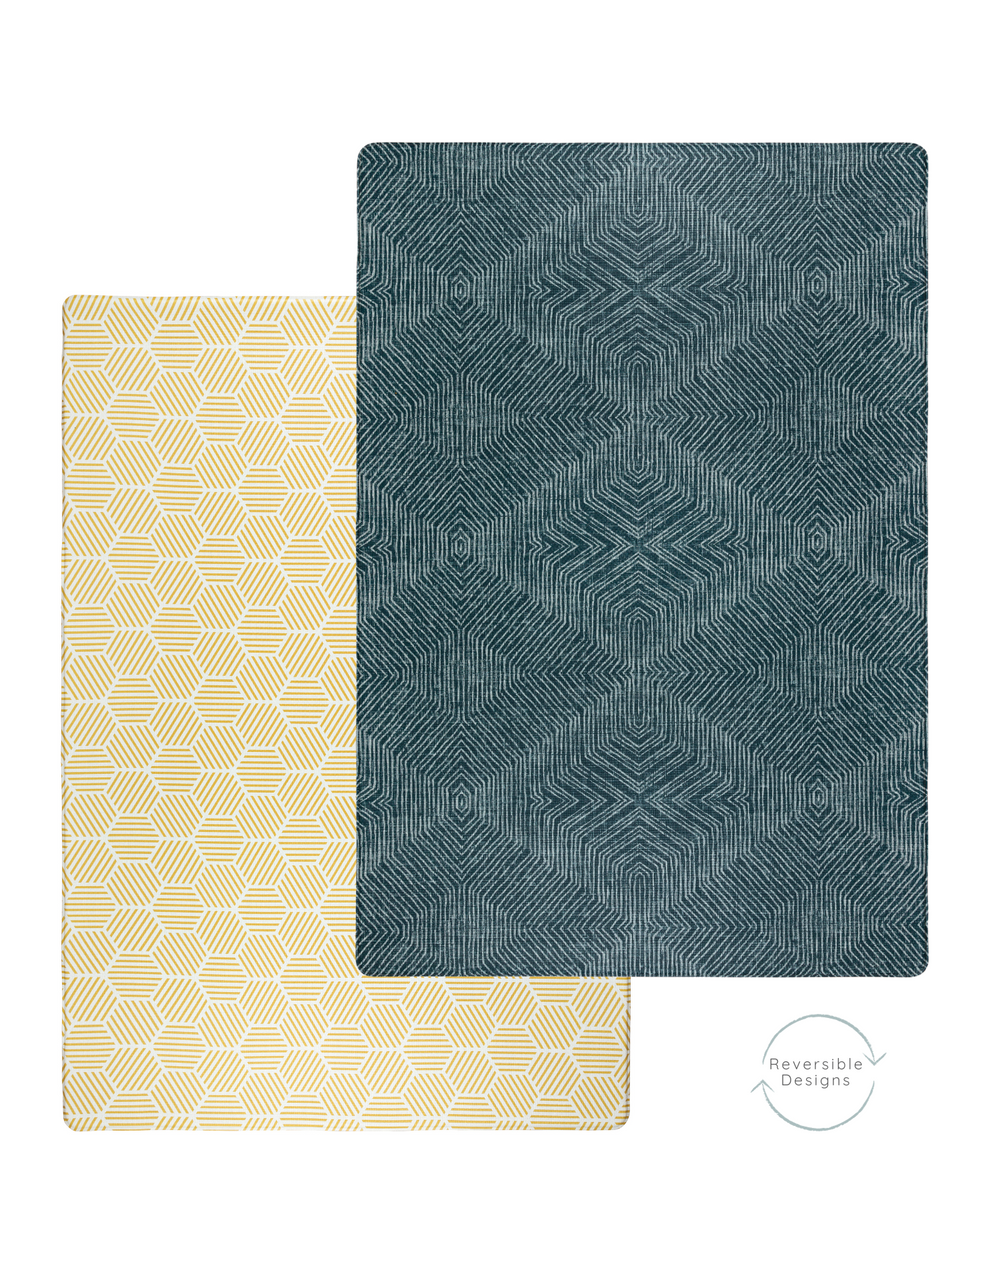 A neutral and soothing double-sided play mat for relaxation